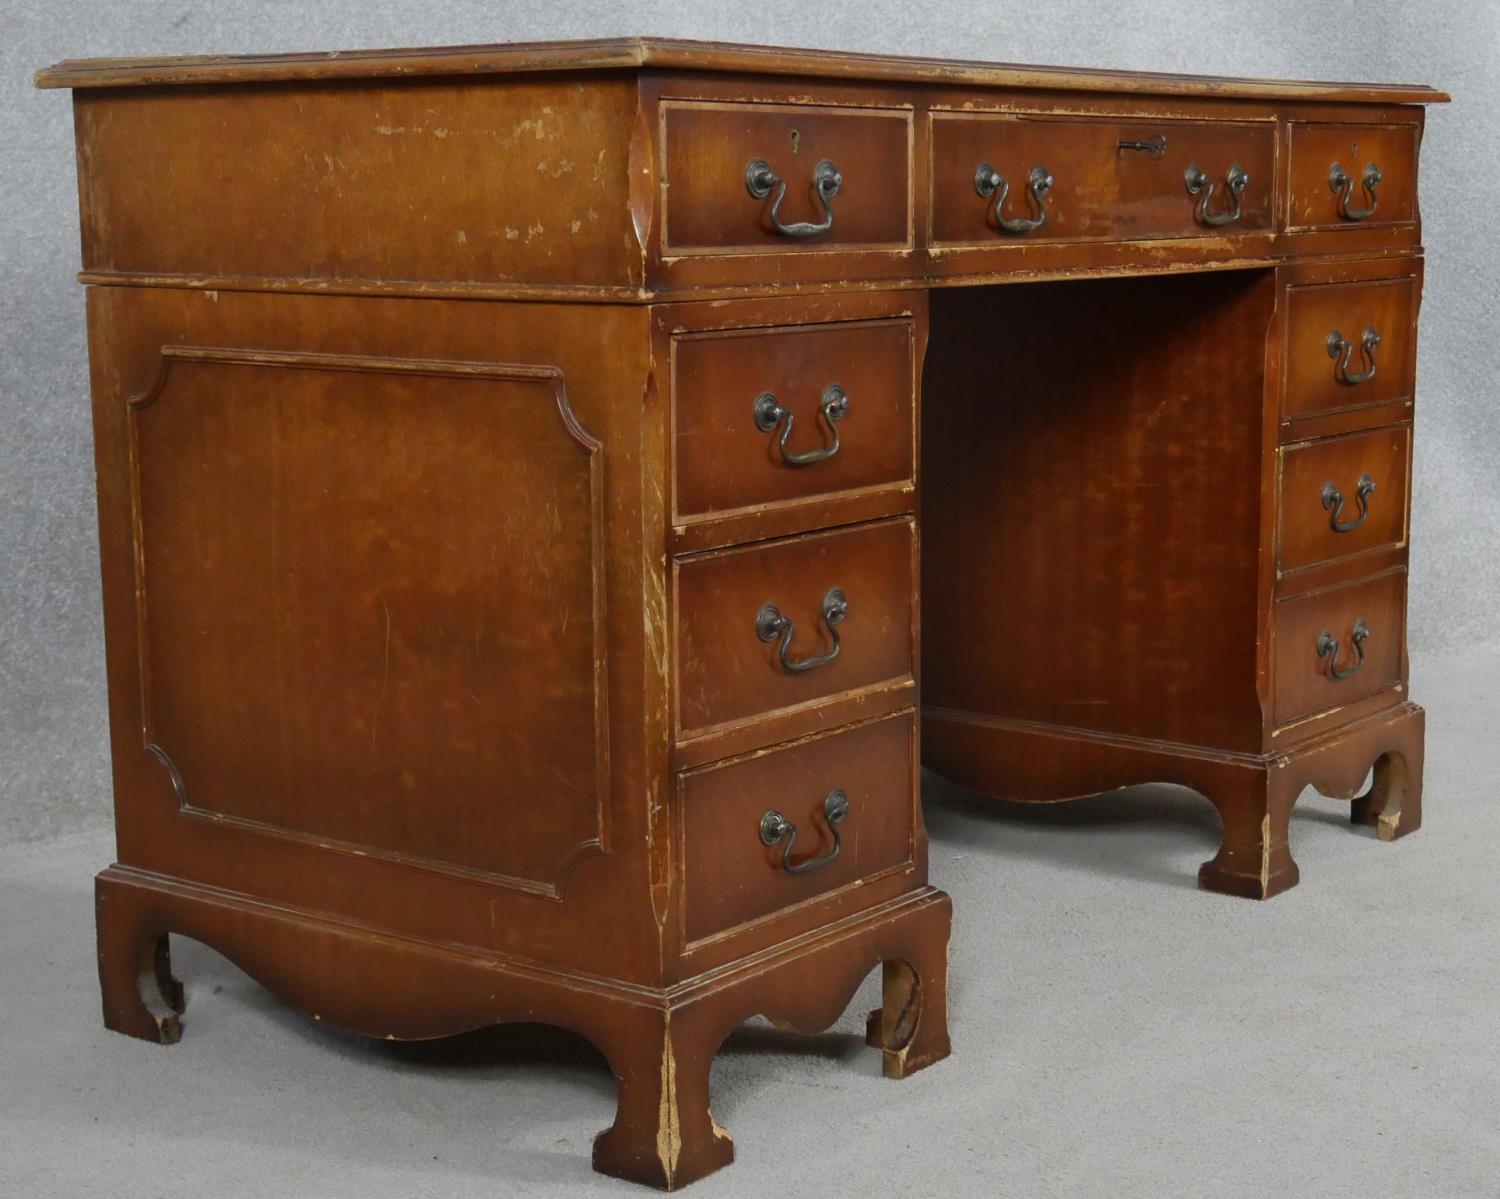 A Georgian style mahogany three section pedestal desk with inset leather top on shaped bracket feet. - Image 4 of 5